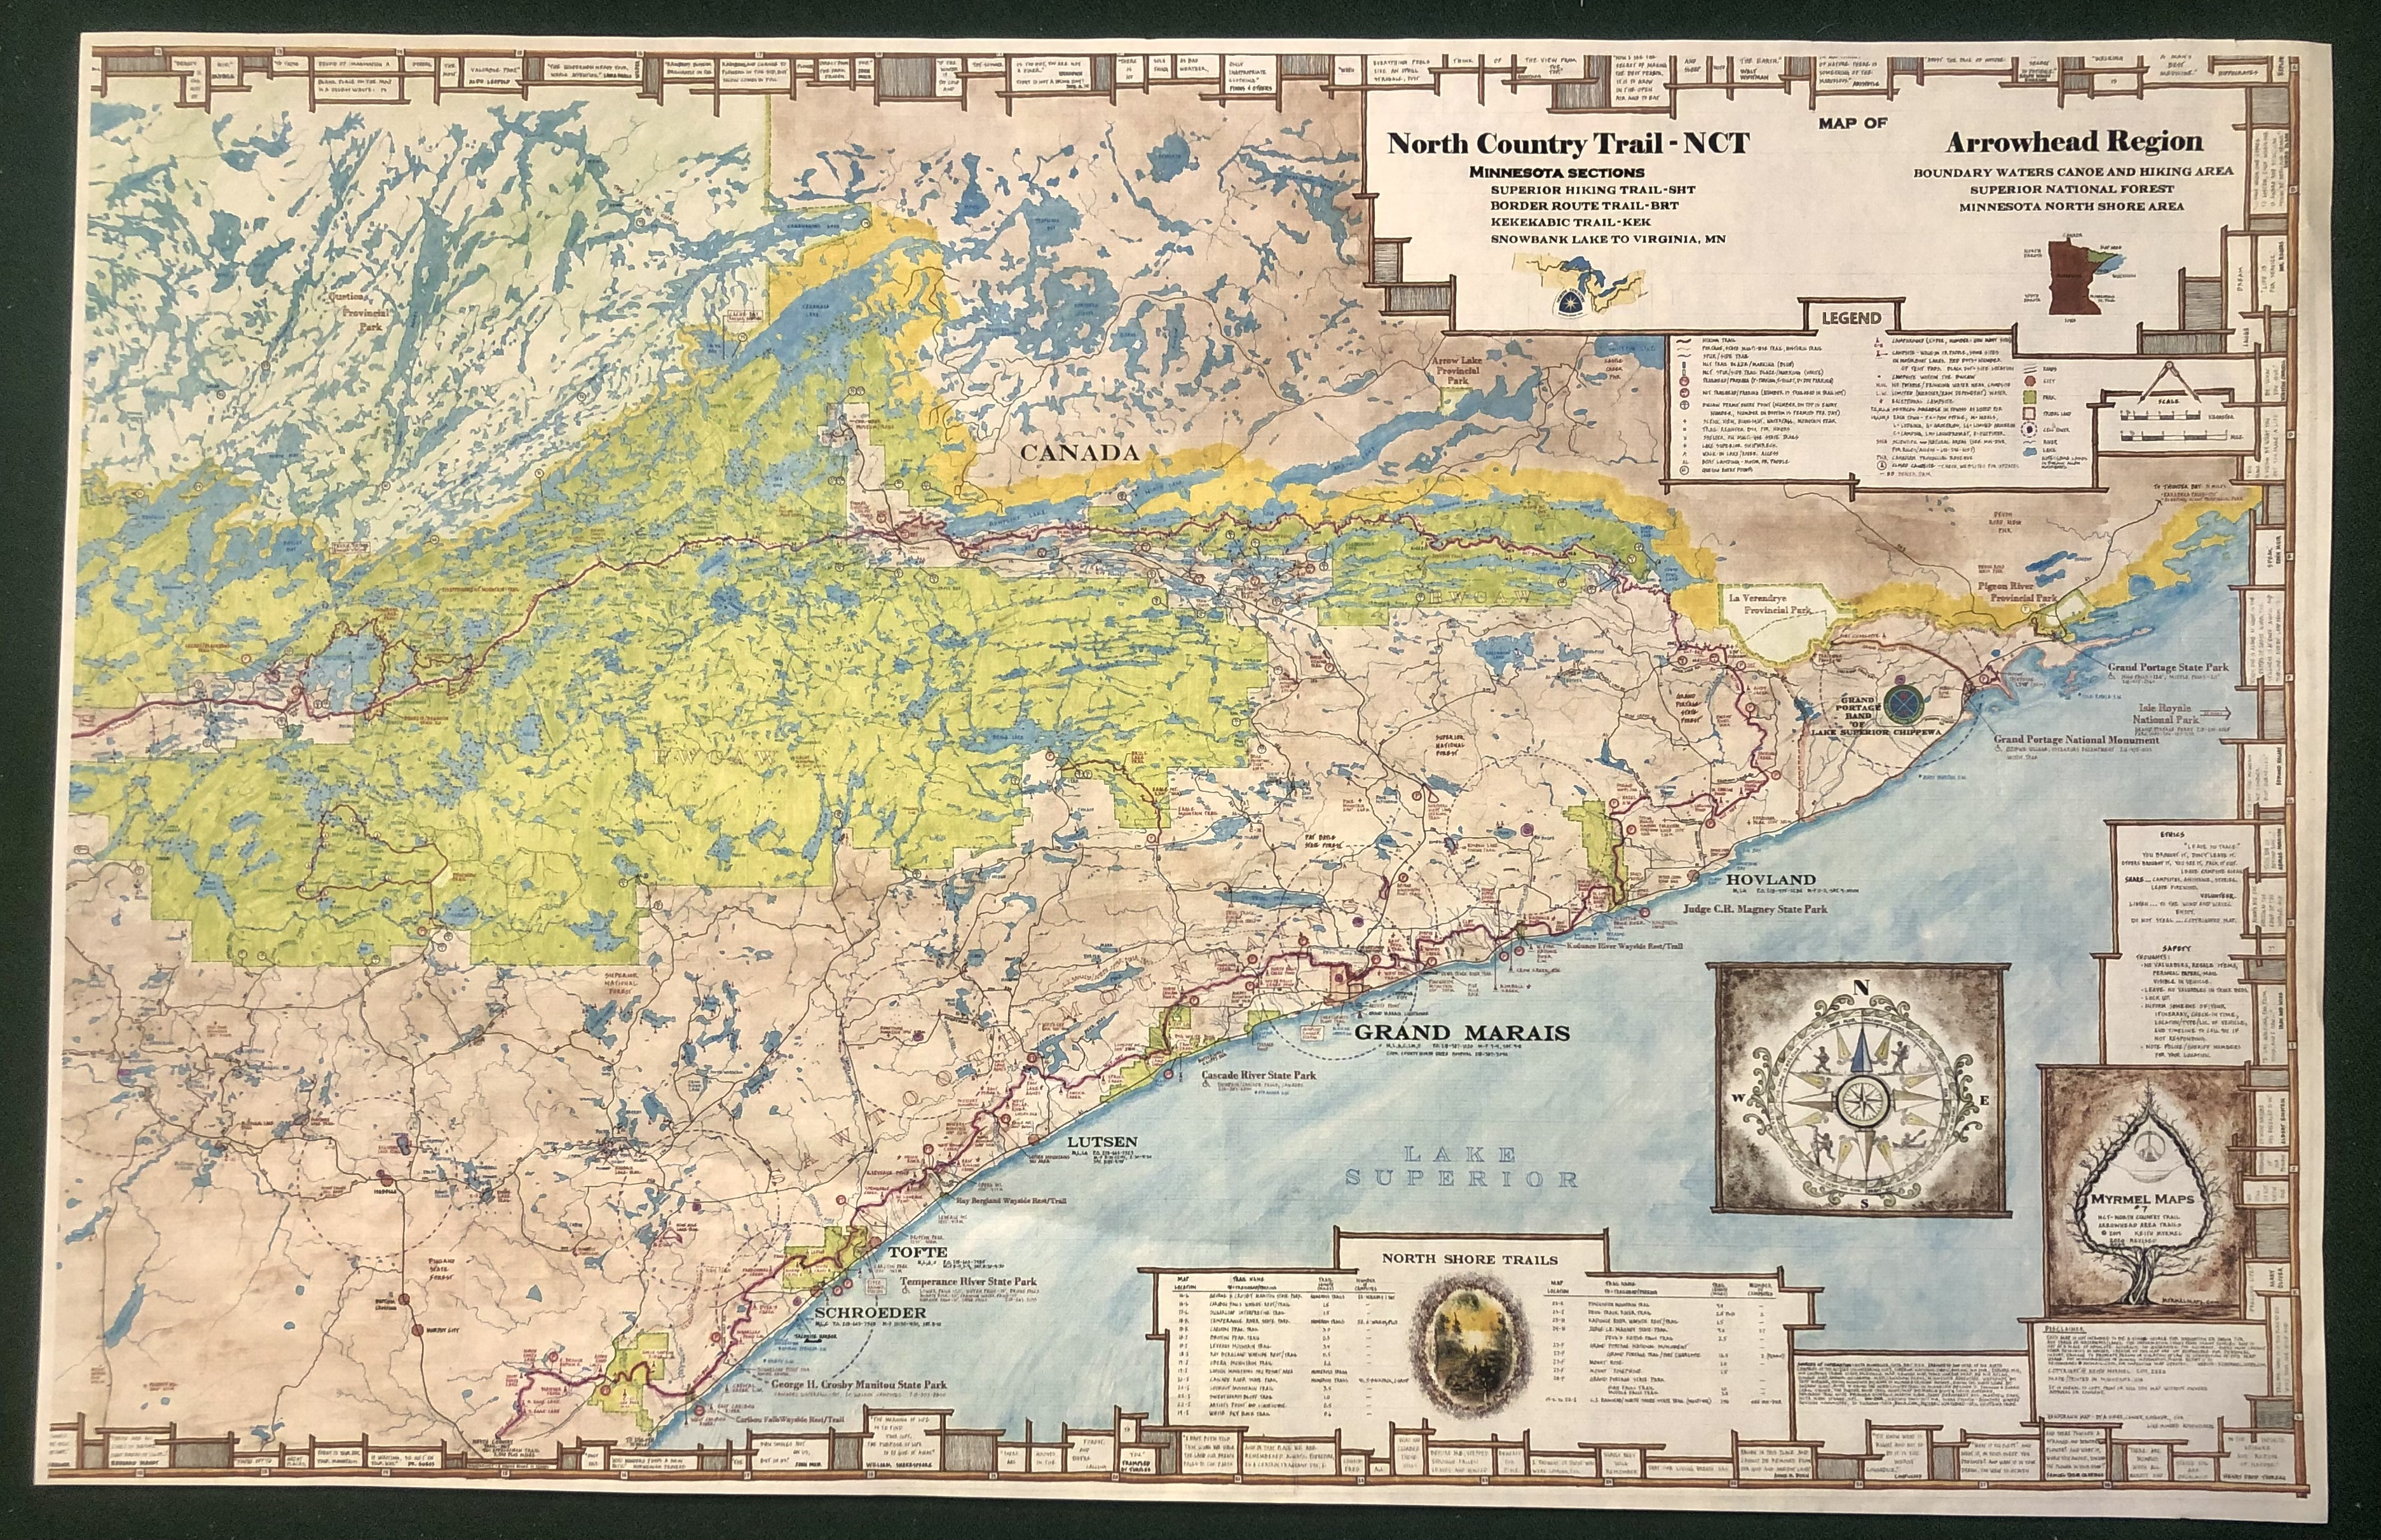 BWCAW / Superior National Forest Map